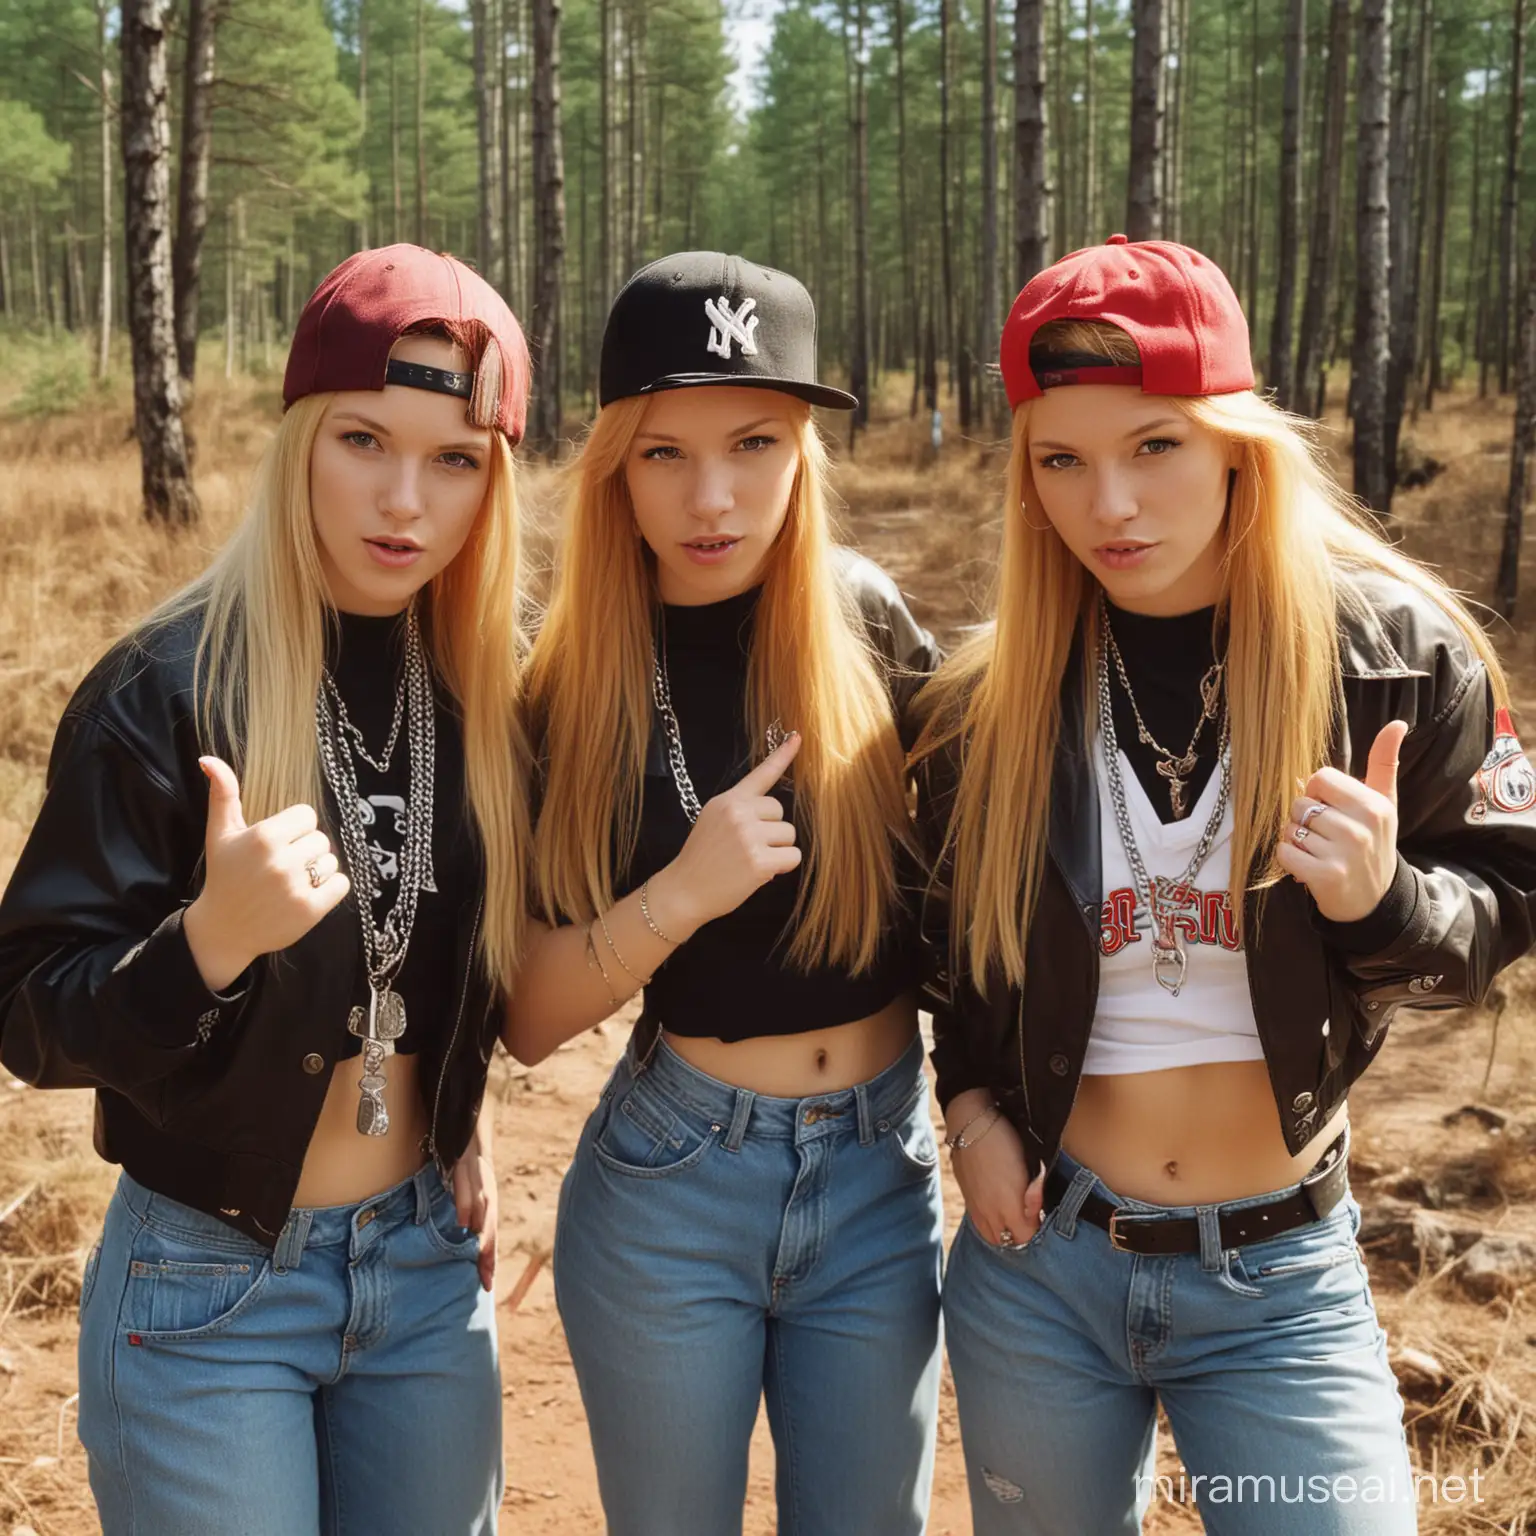 Late 1990's rap hip hop album, nordic red and blond haired girls wearing manly swag clothing with caps and necklaces, gangster gesture, finland forest background